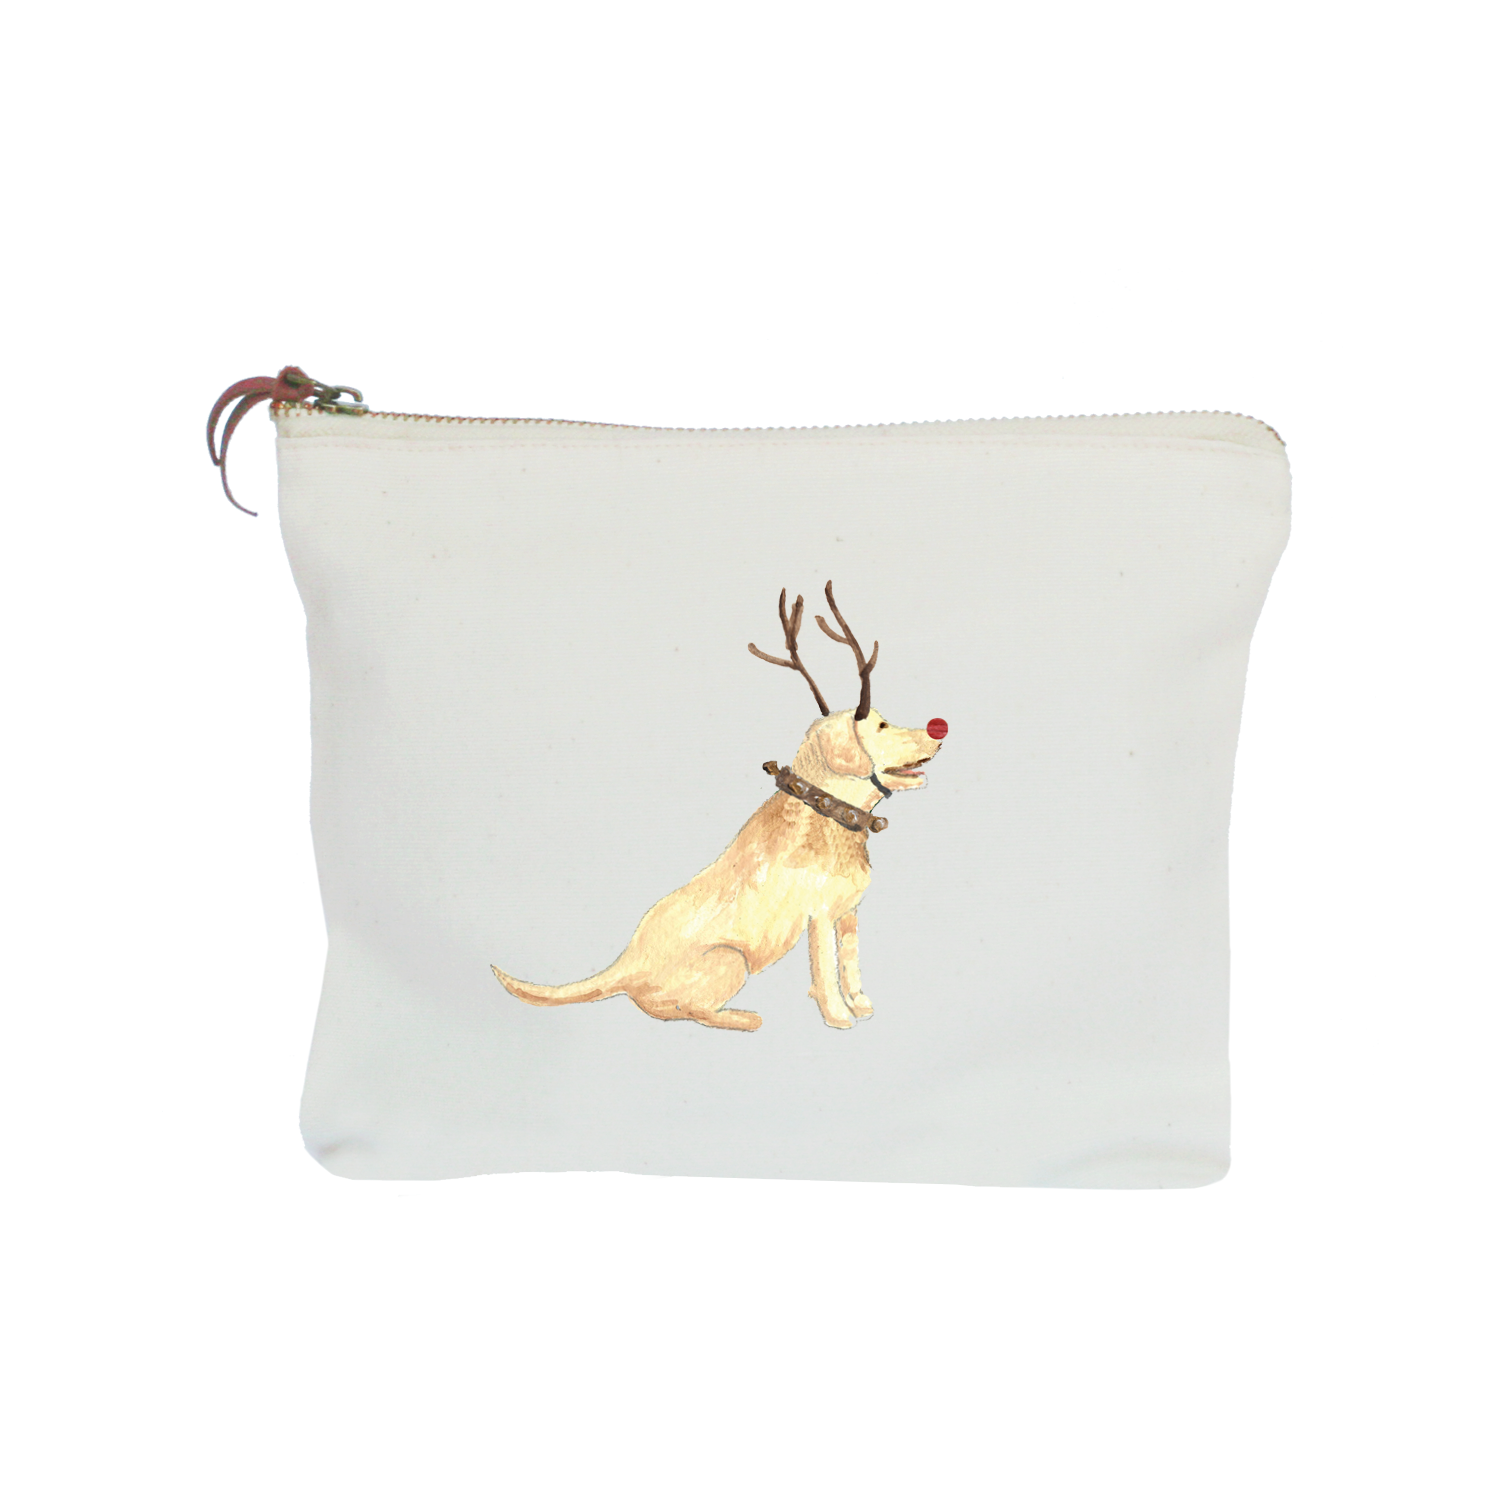 yellow lab with red nose zipper pouch